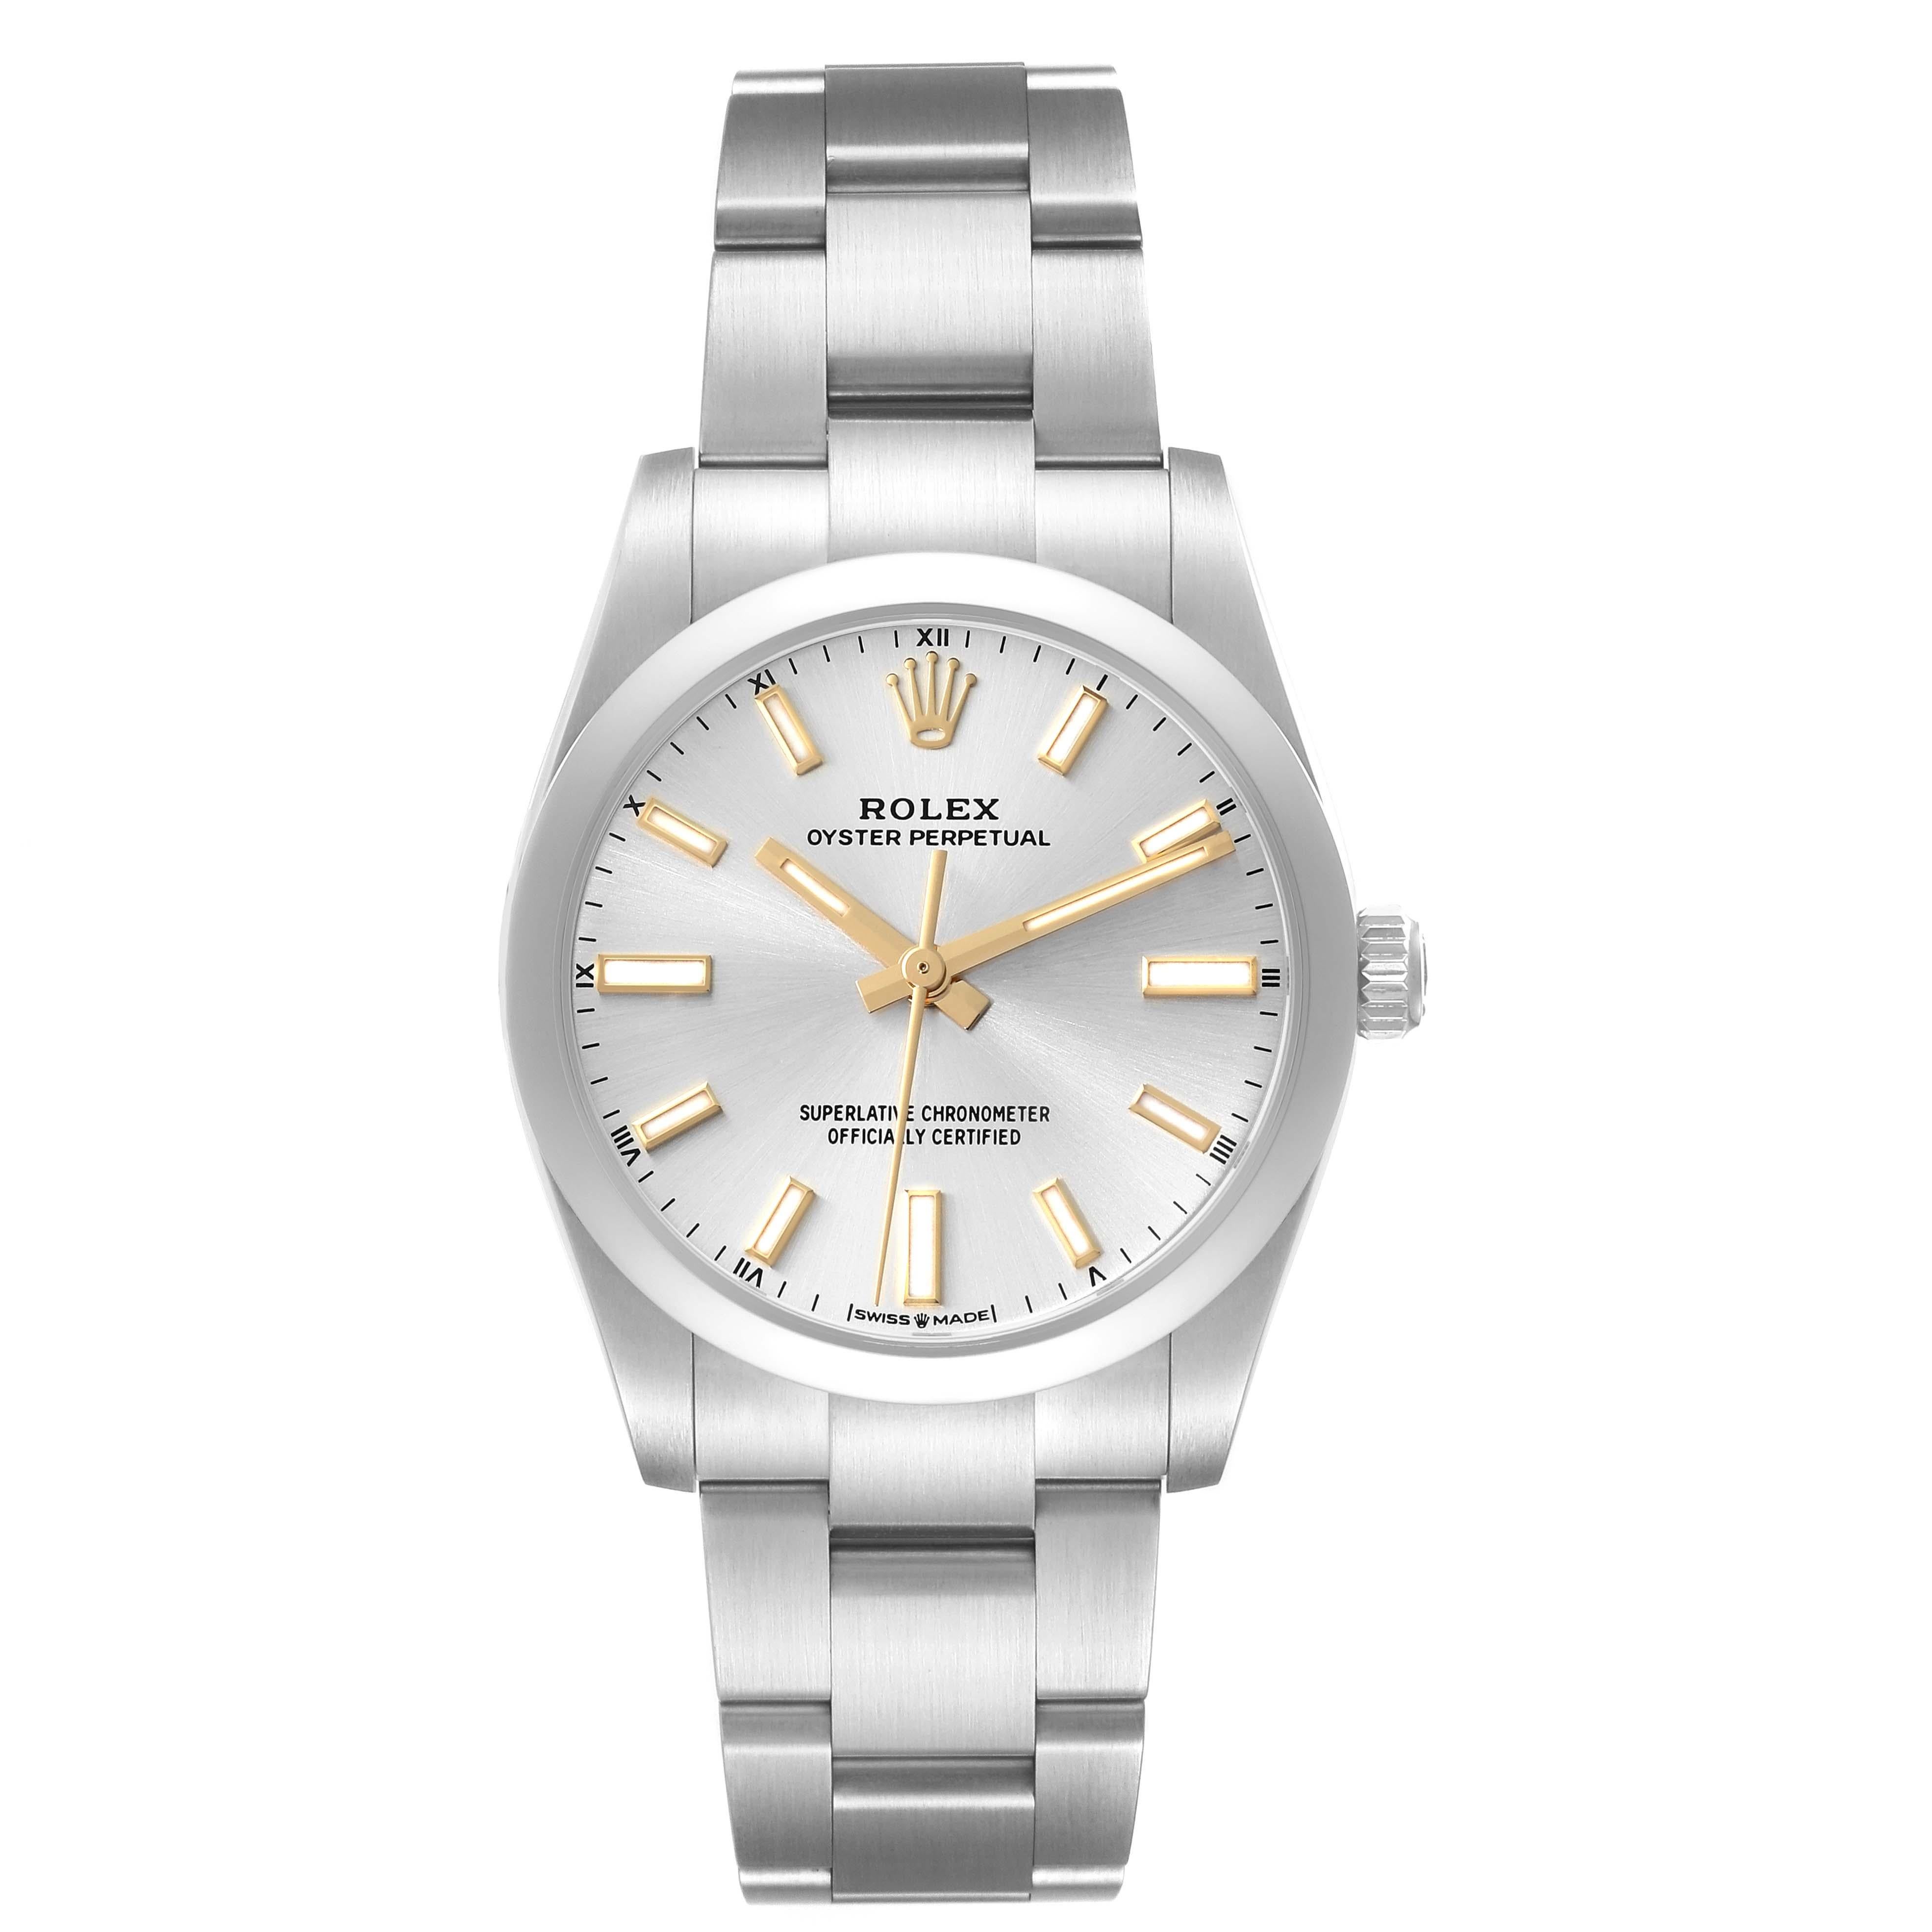 Rolex Oyster Perpetual 34mm Silver Dial Steel Mens Watch 124200. Officially certified chronometer automatic self-winding movement. Stainless steel case 34 mm in diameter. Rolex logo on a crown. Stainless steel smooth domed bezel. Scratch resistant